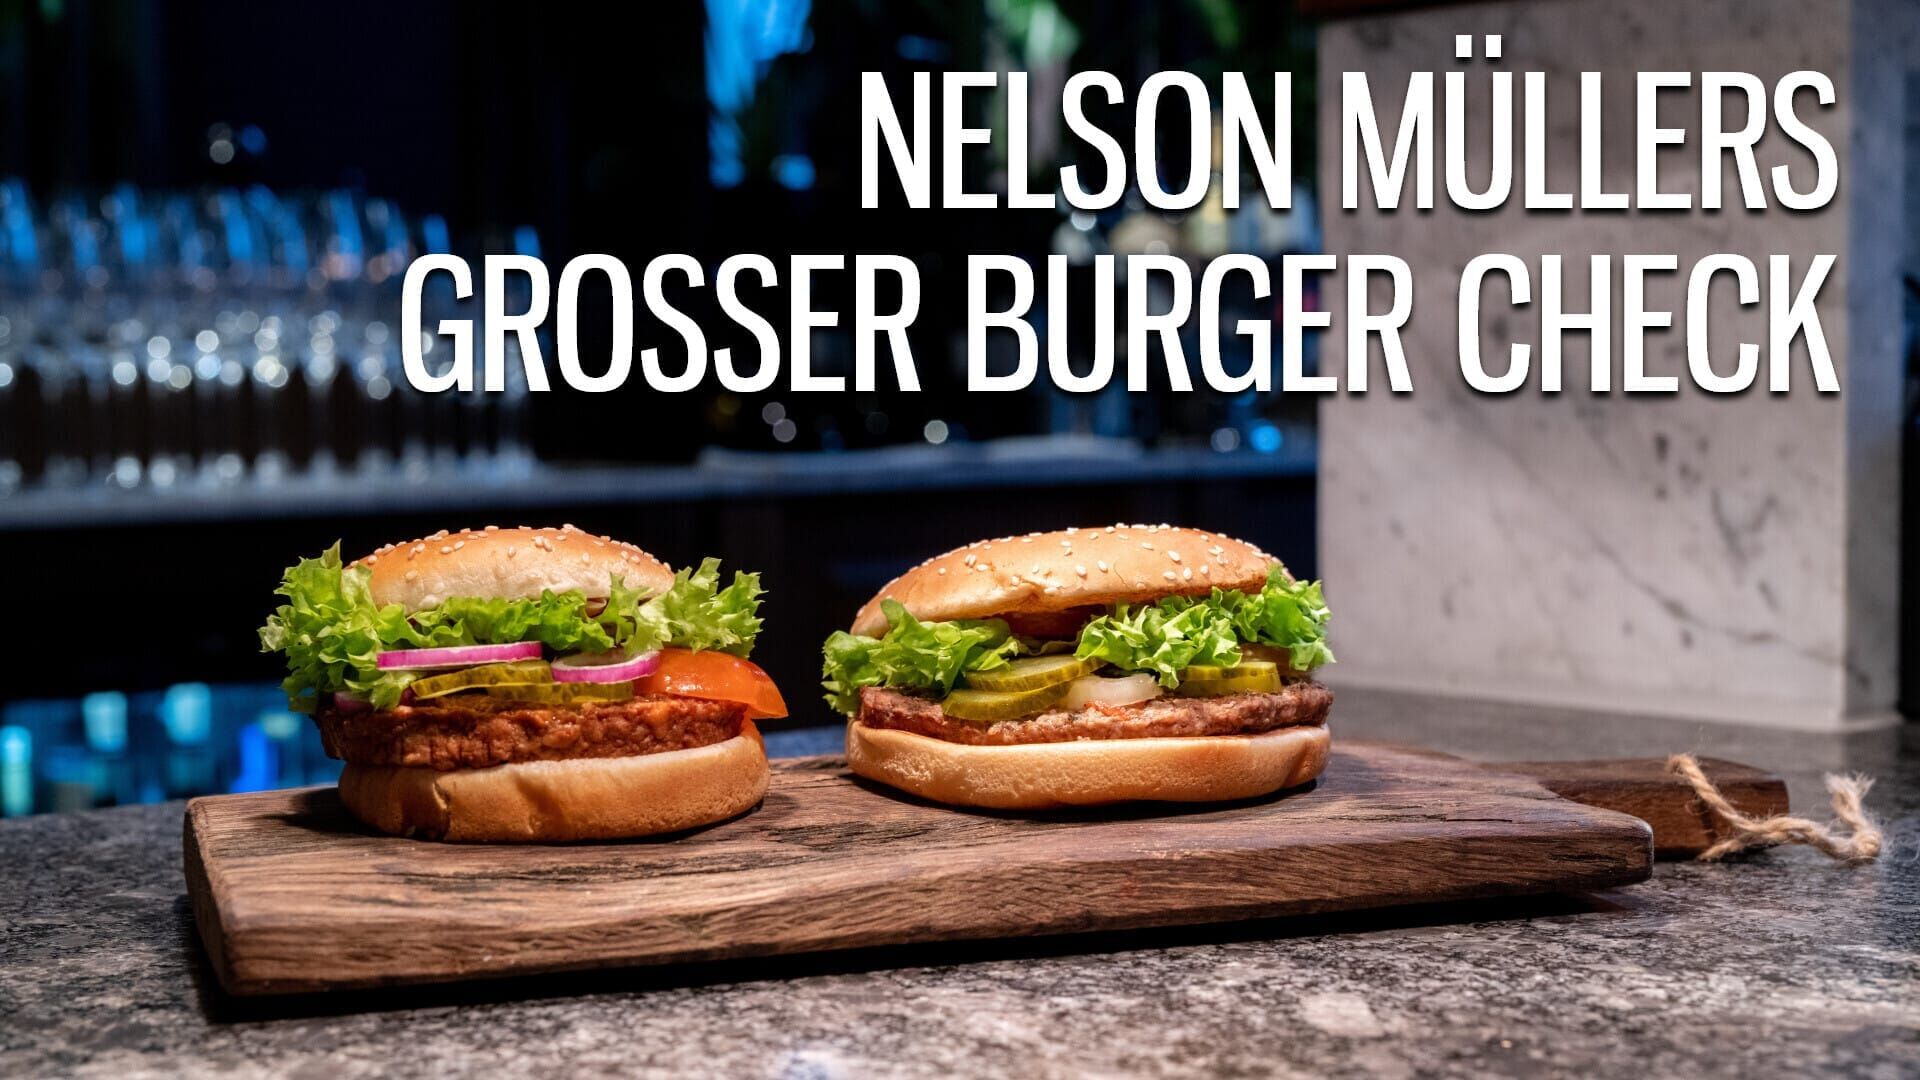 Nelson Müllers großer Burger-Check